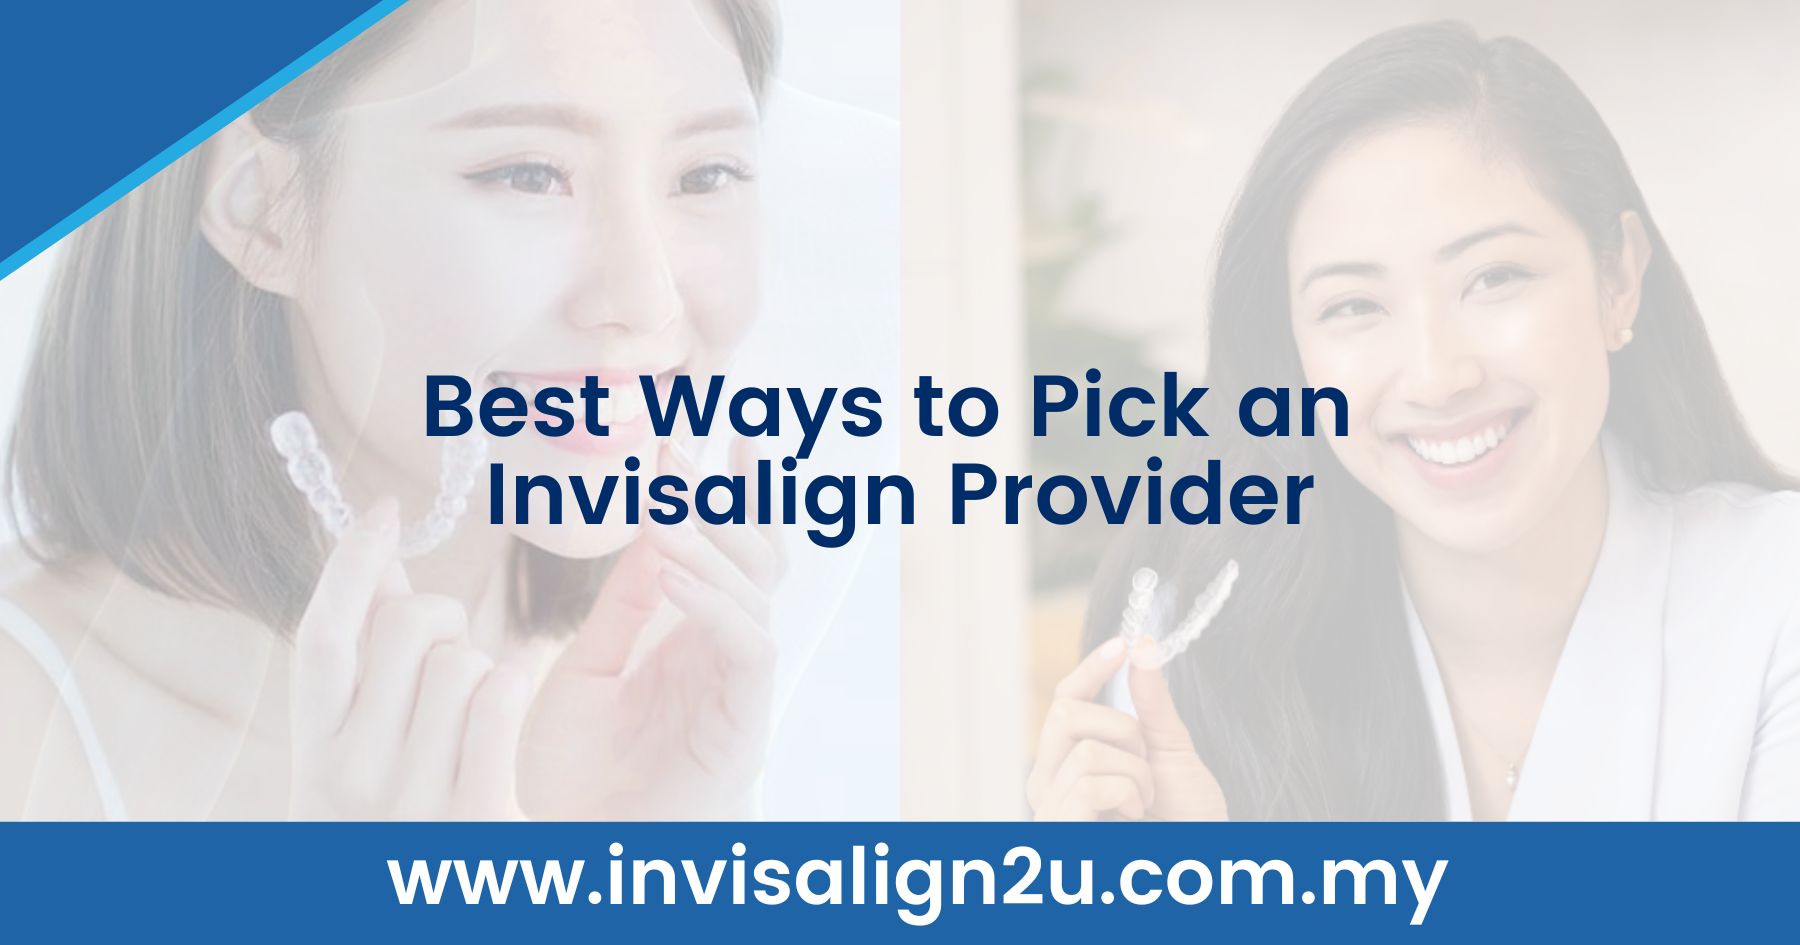 Best Ways to Pick an Invisalign Provider